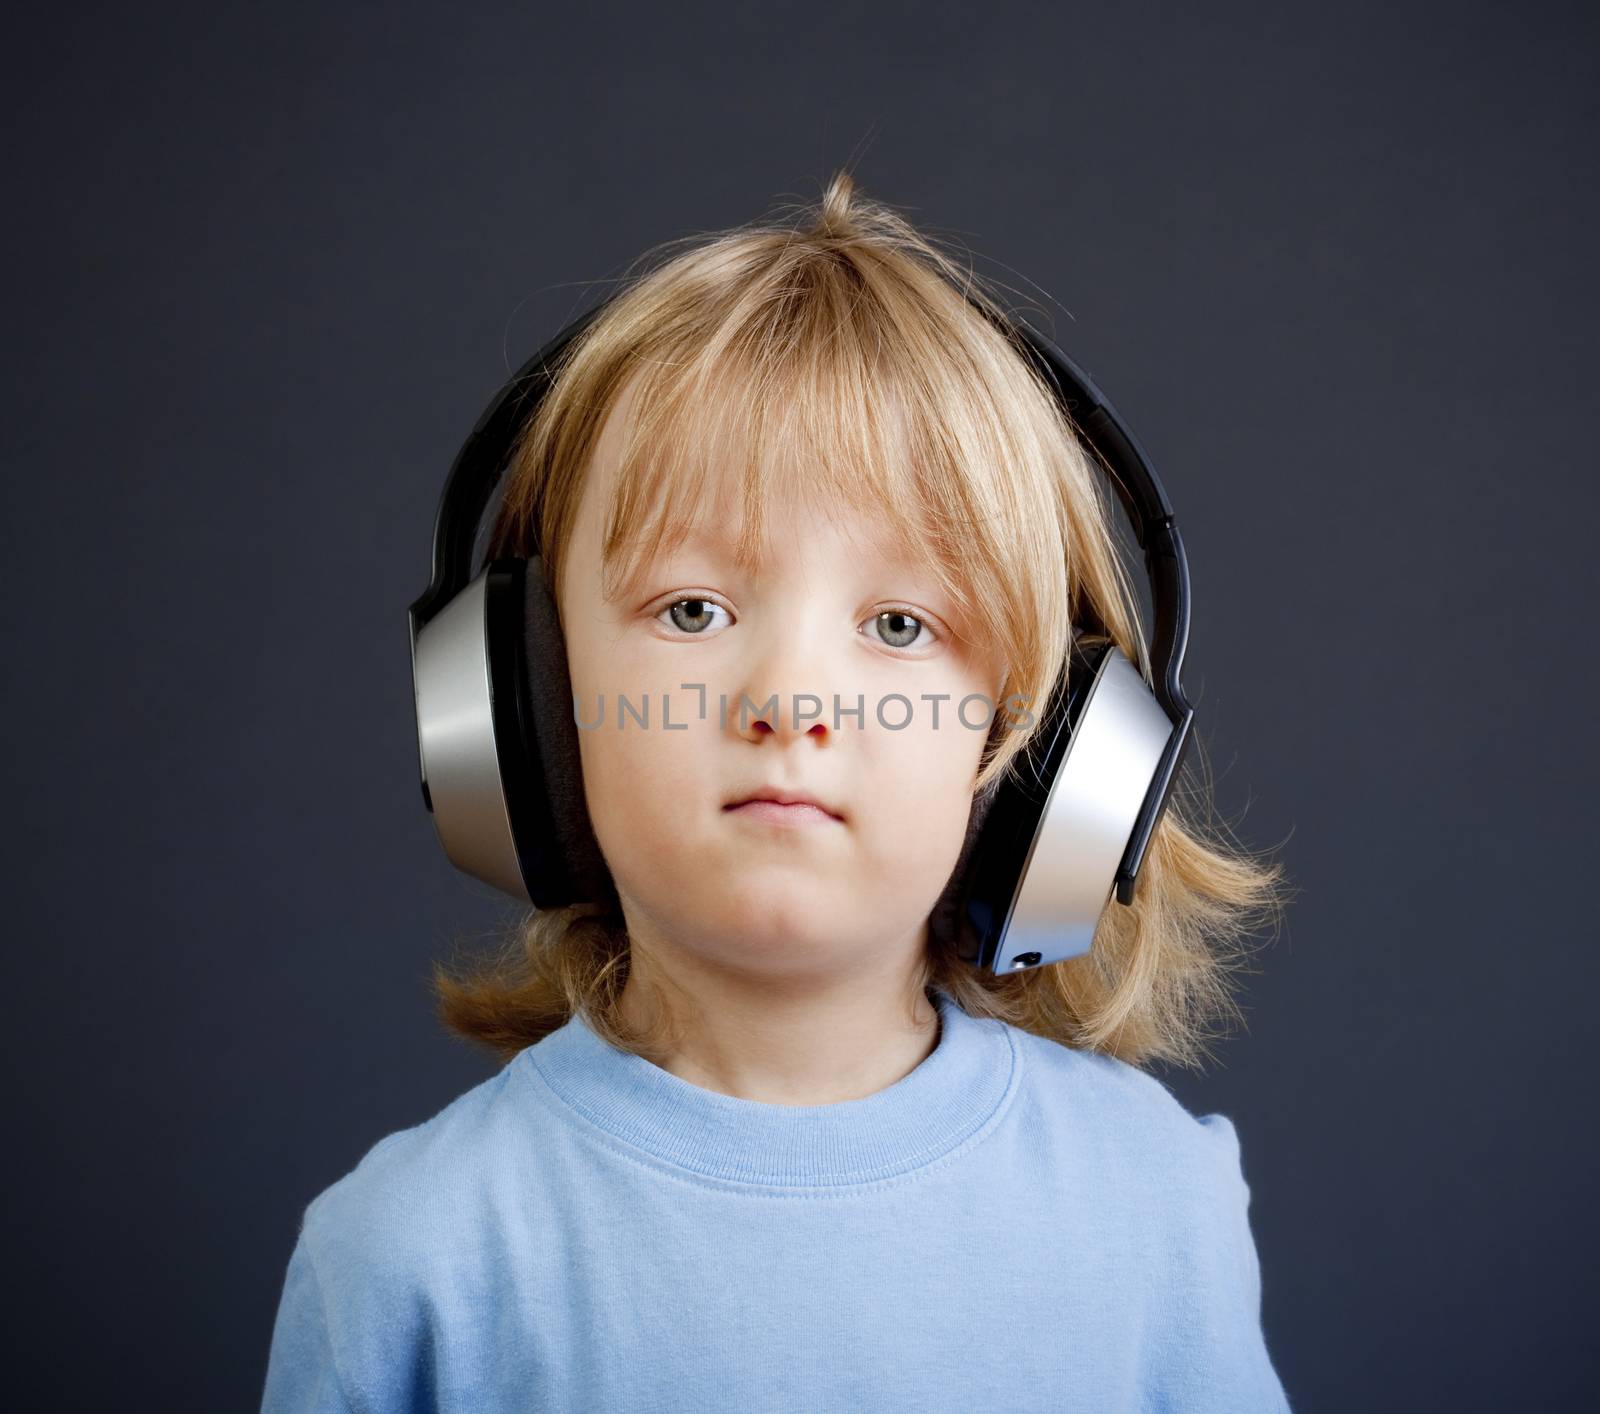 boy with long blond hair listening to music in headphones - isolated on dark blue